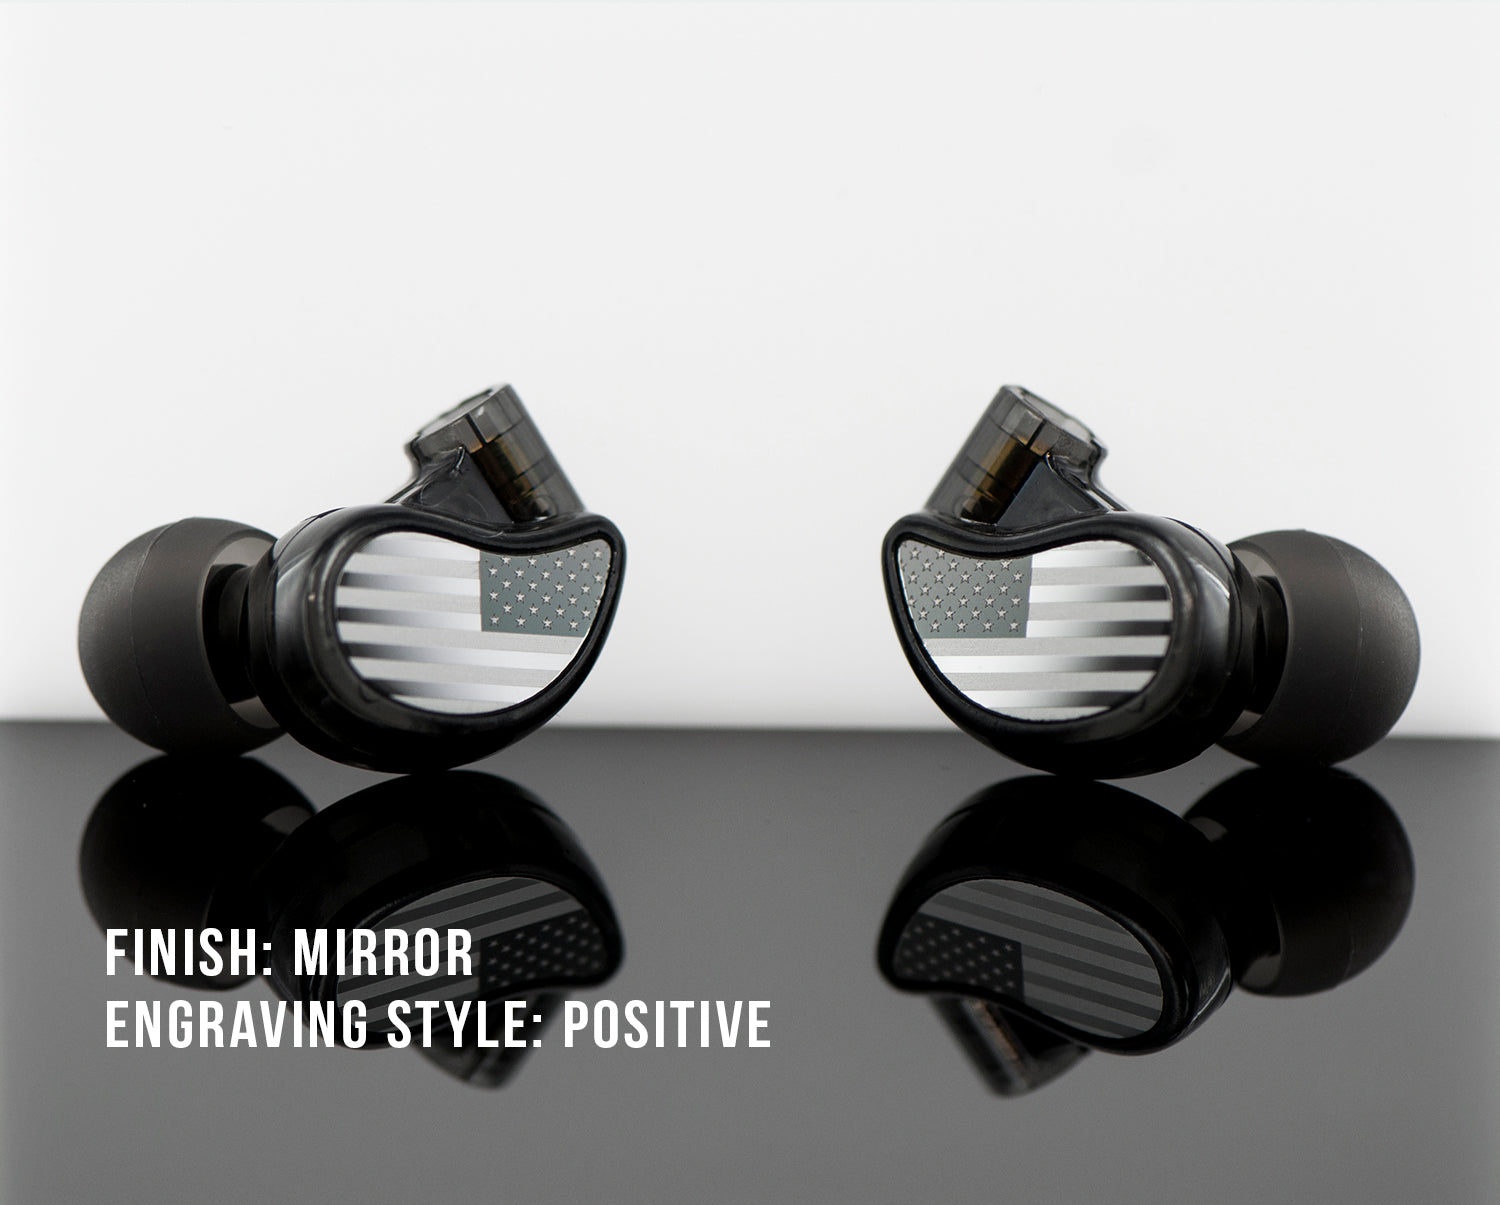 Two black earphones with mirror finish and positive engraving style, featuring a flag design on a reflective surface.